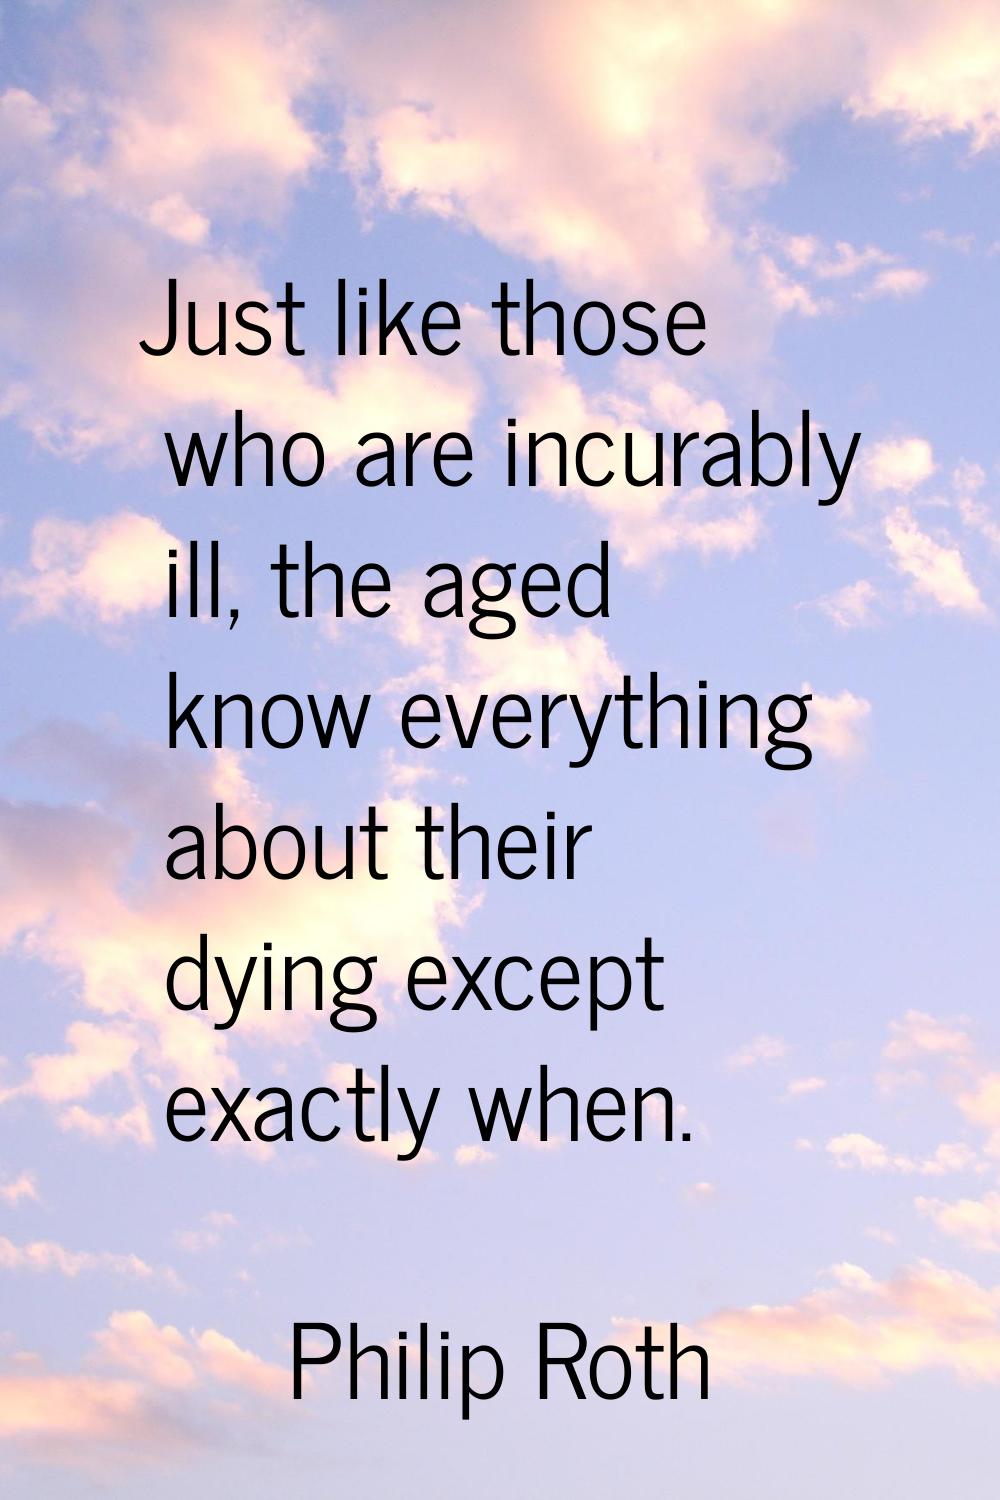 Just like those who are incurably ill, the aged know everything about their dying except exactly wh